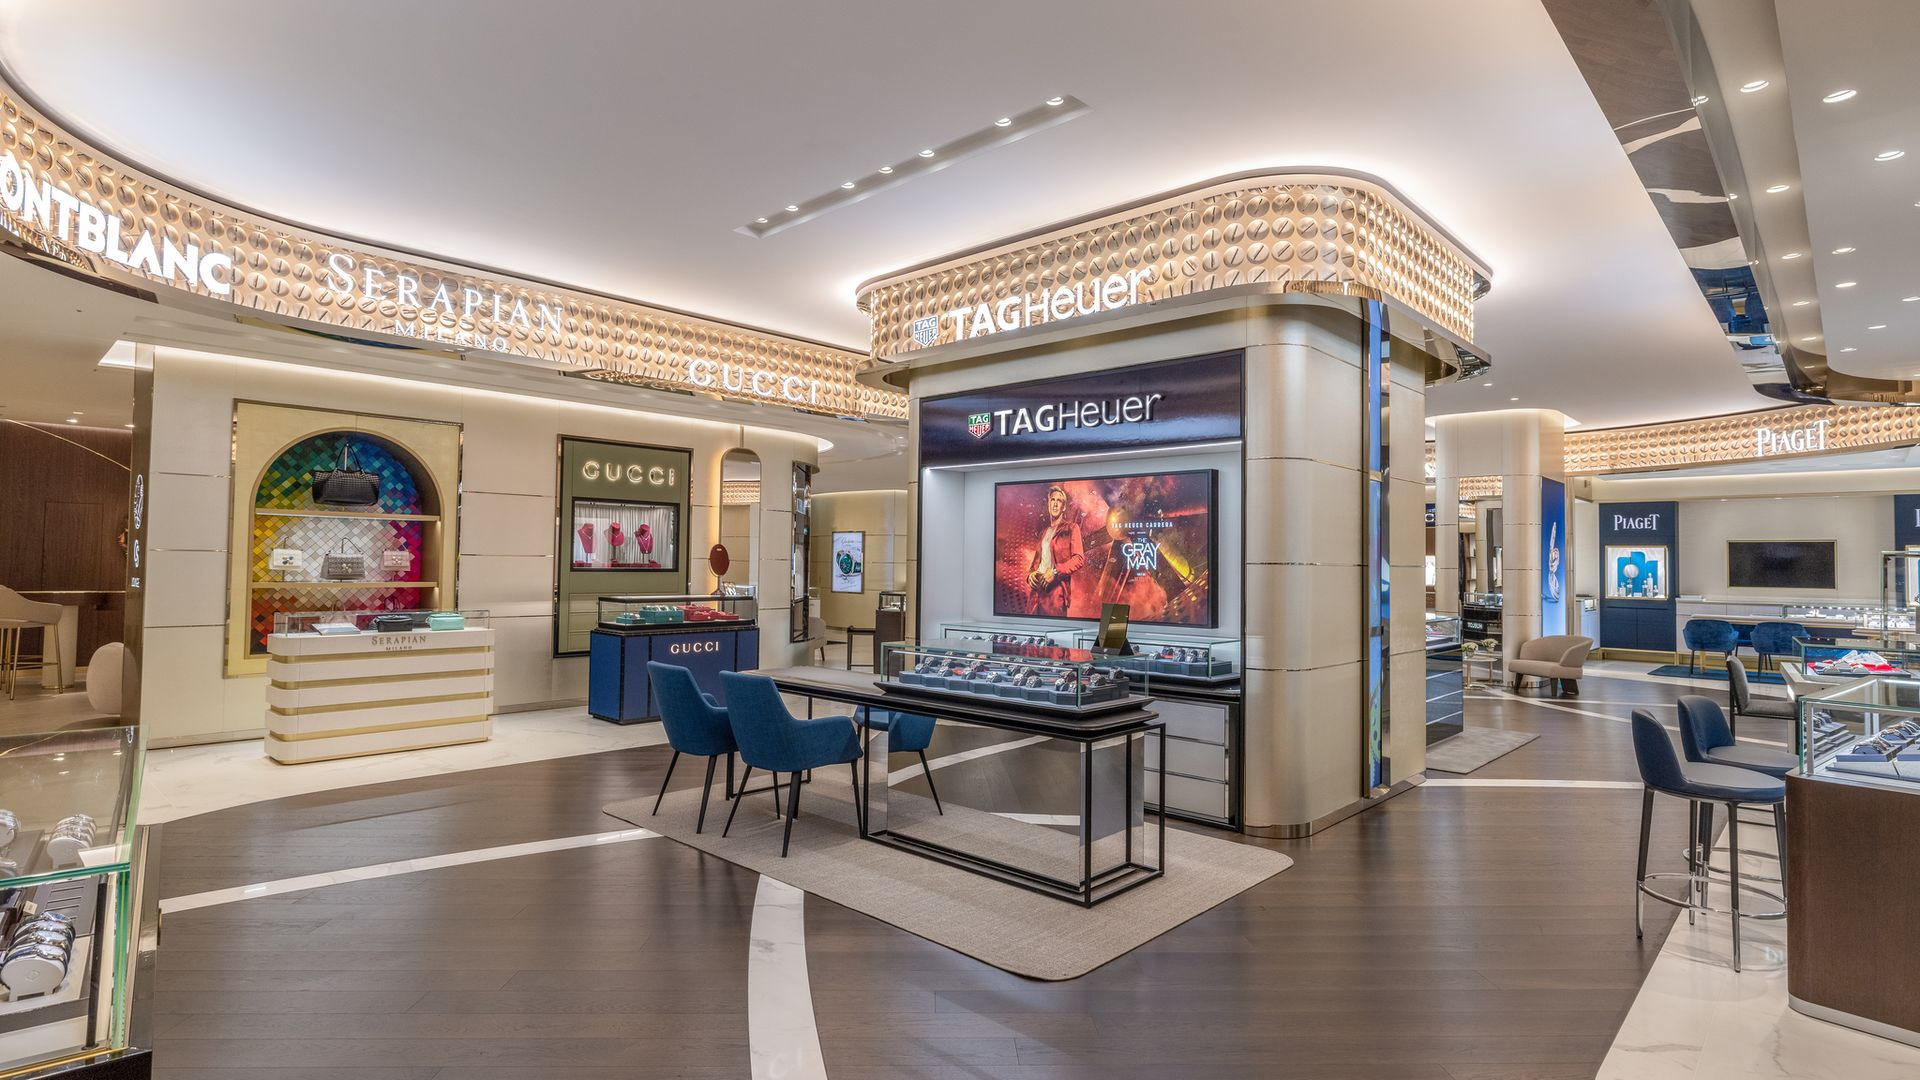 Will Richemont Watchmakers Match Success of Jewellery Maisons?